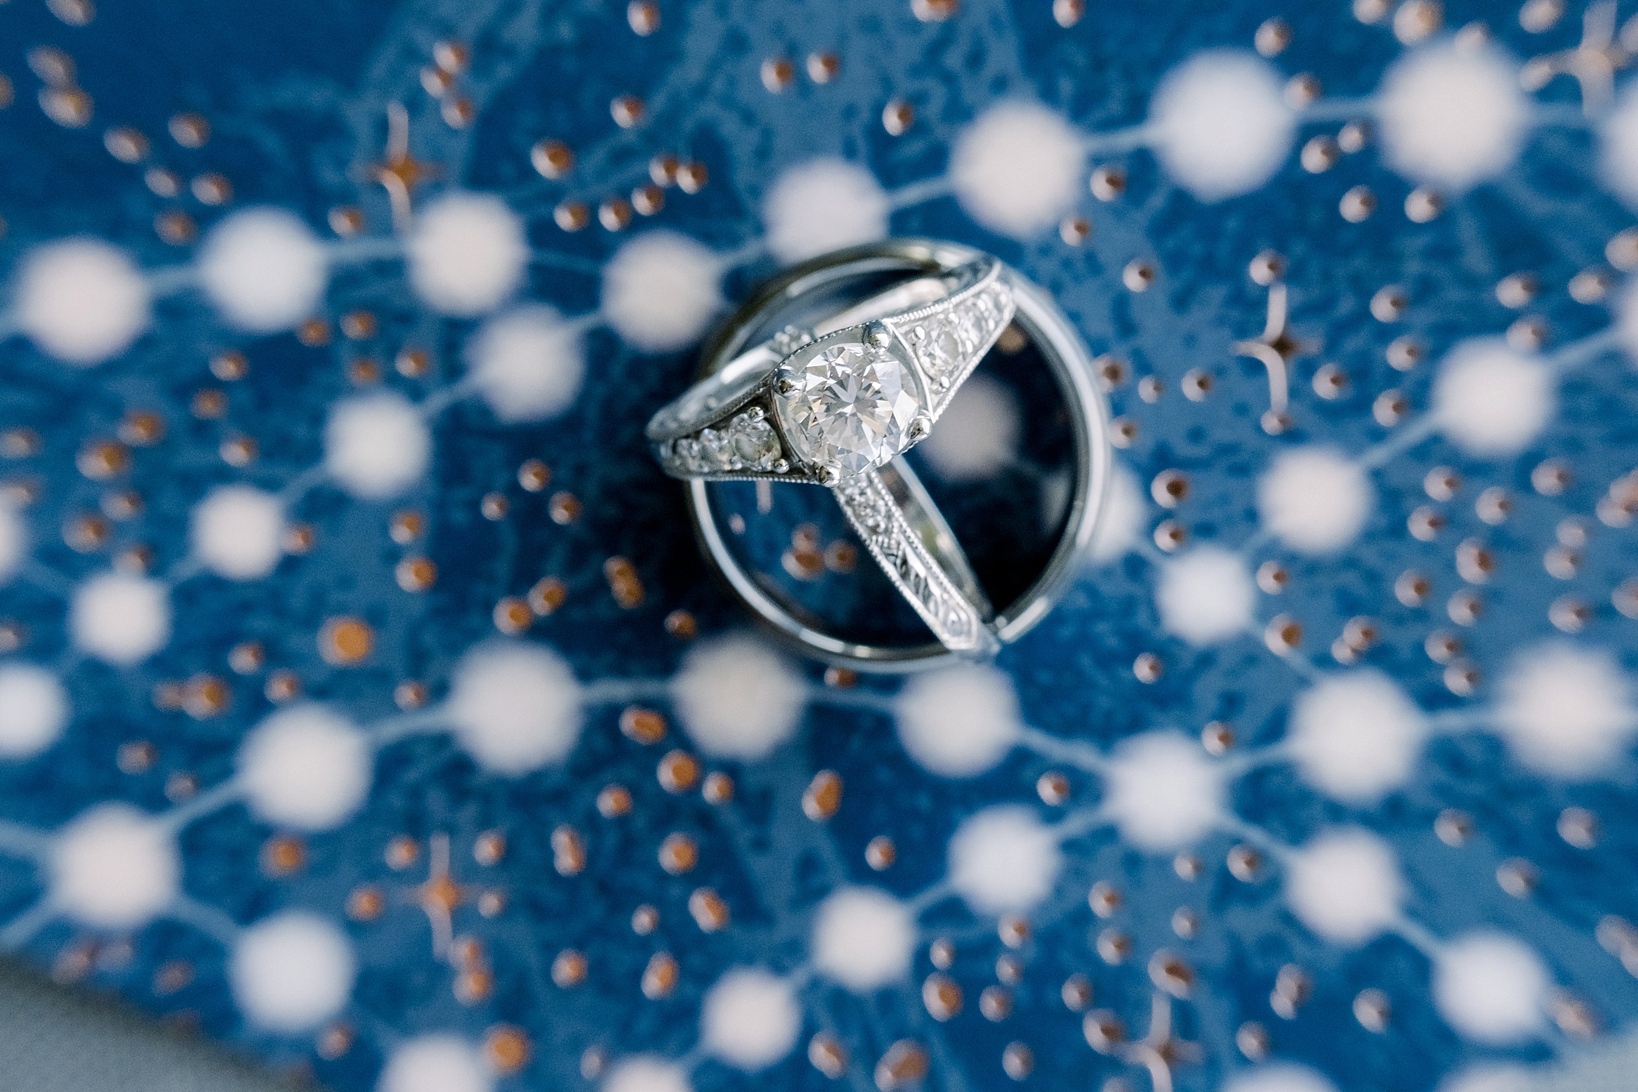 The wedding rings in front of a patterned background from the wedding invitation by Sarah and Ben Photography